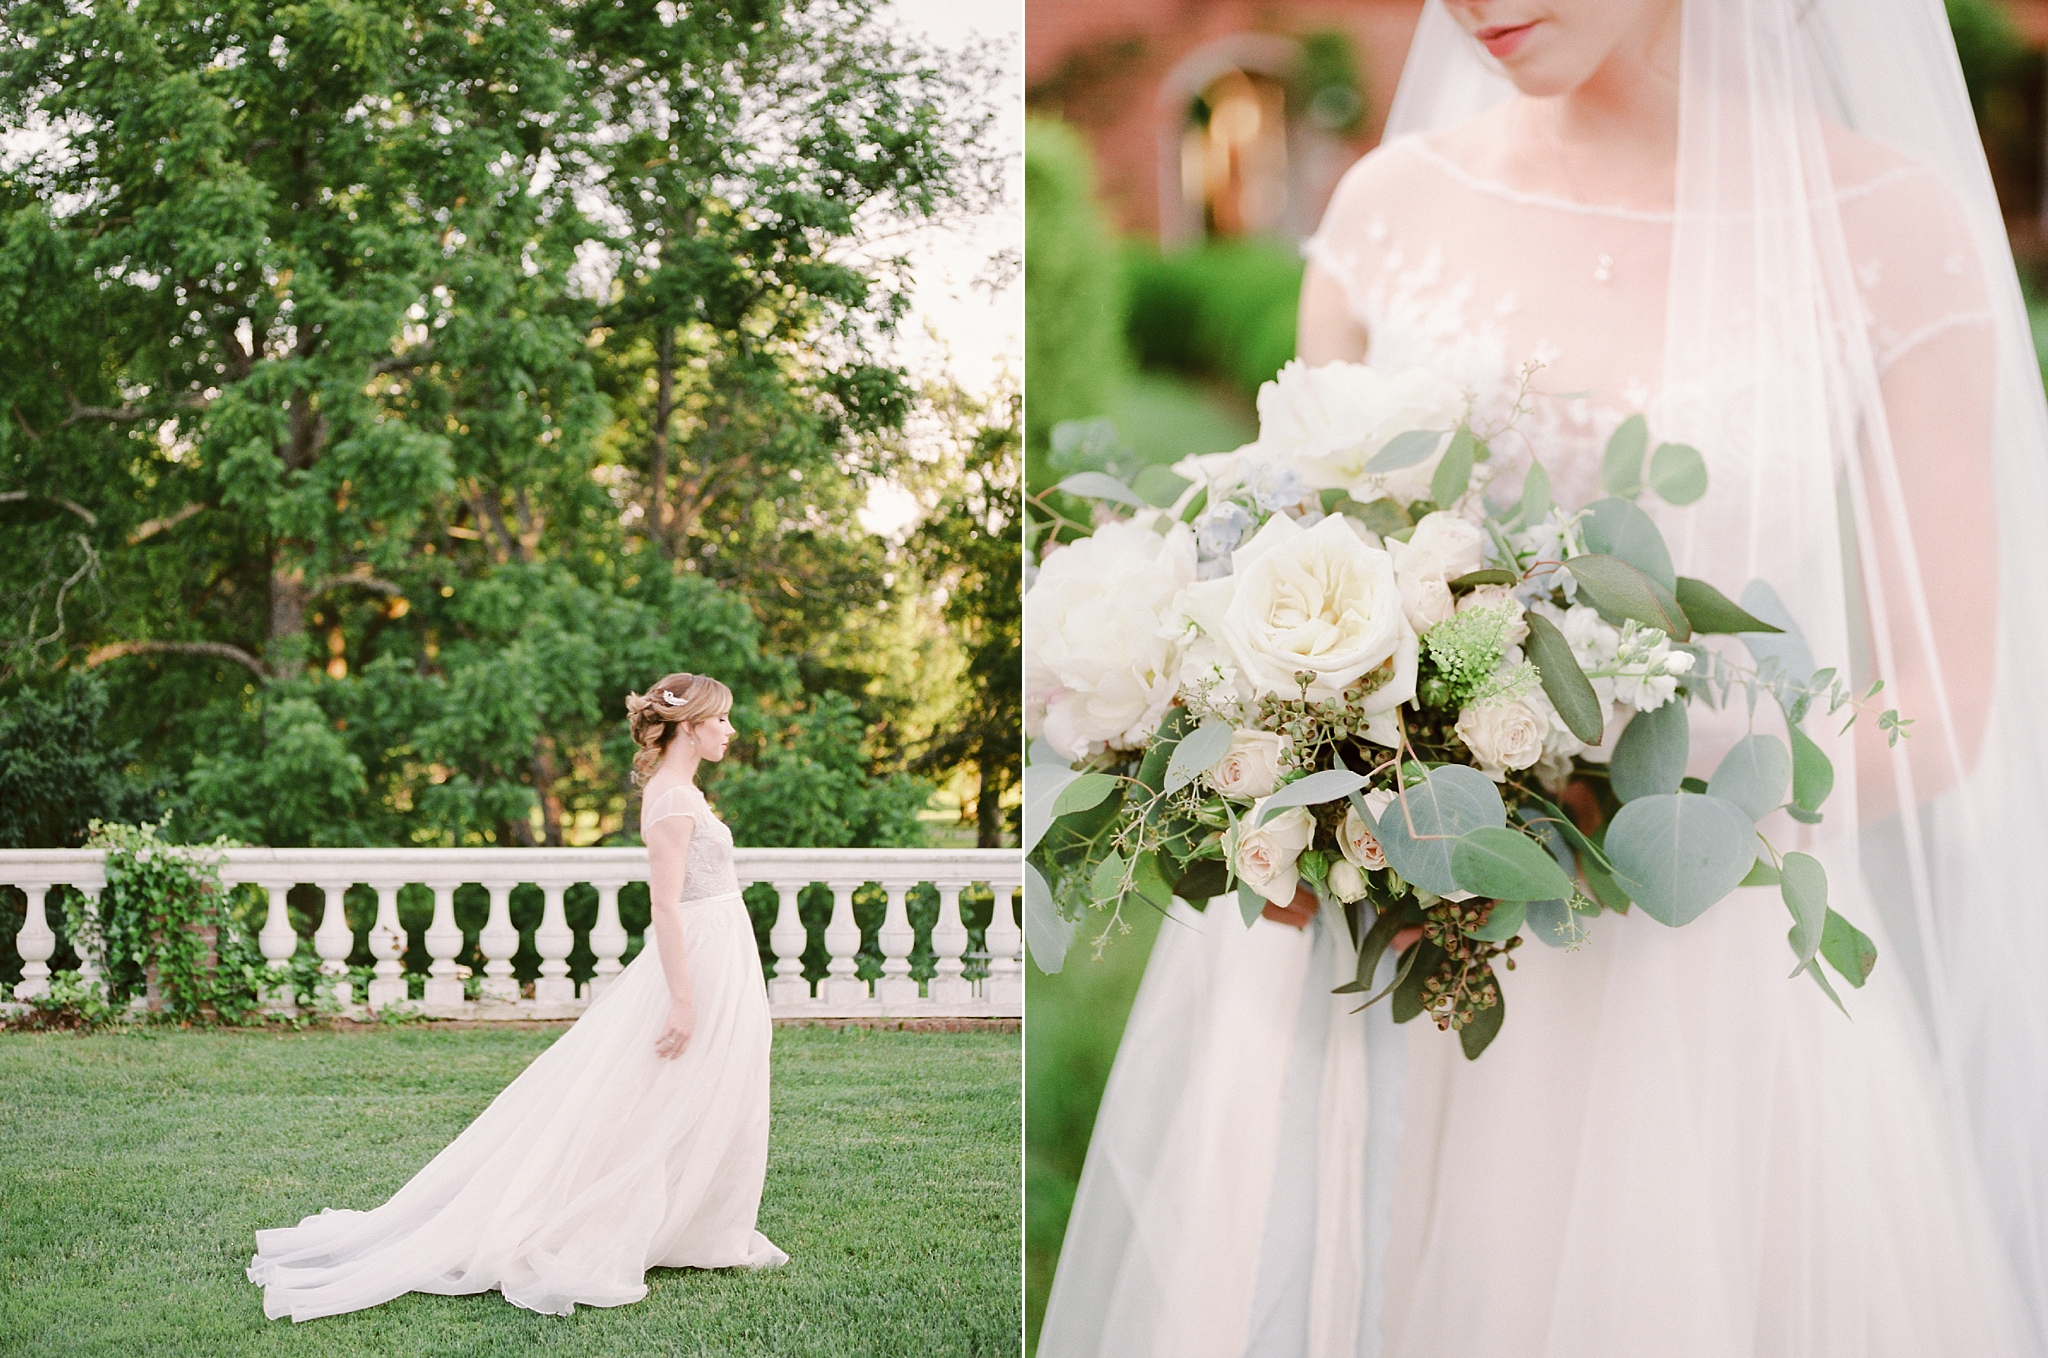 Classic and timeless bridal portraits are captured by Washington, DC fine art wedding photographer, Alicia Lacey at Oatlands Plantation in Leesburg, VA.